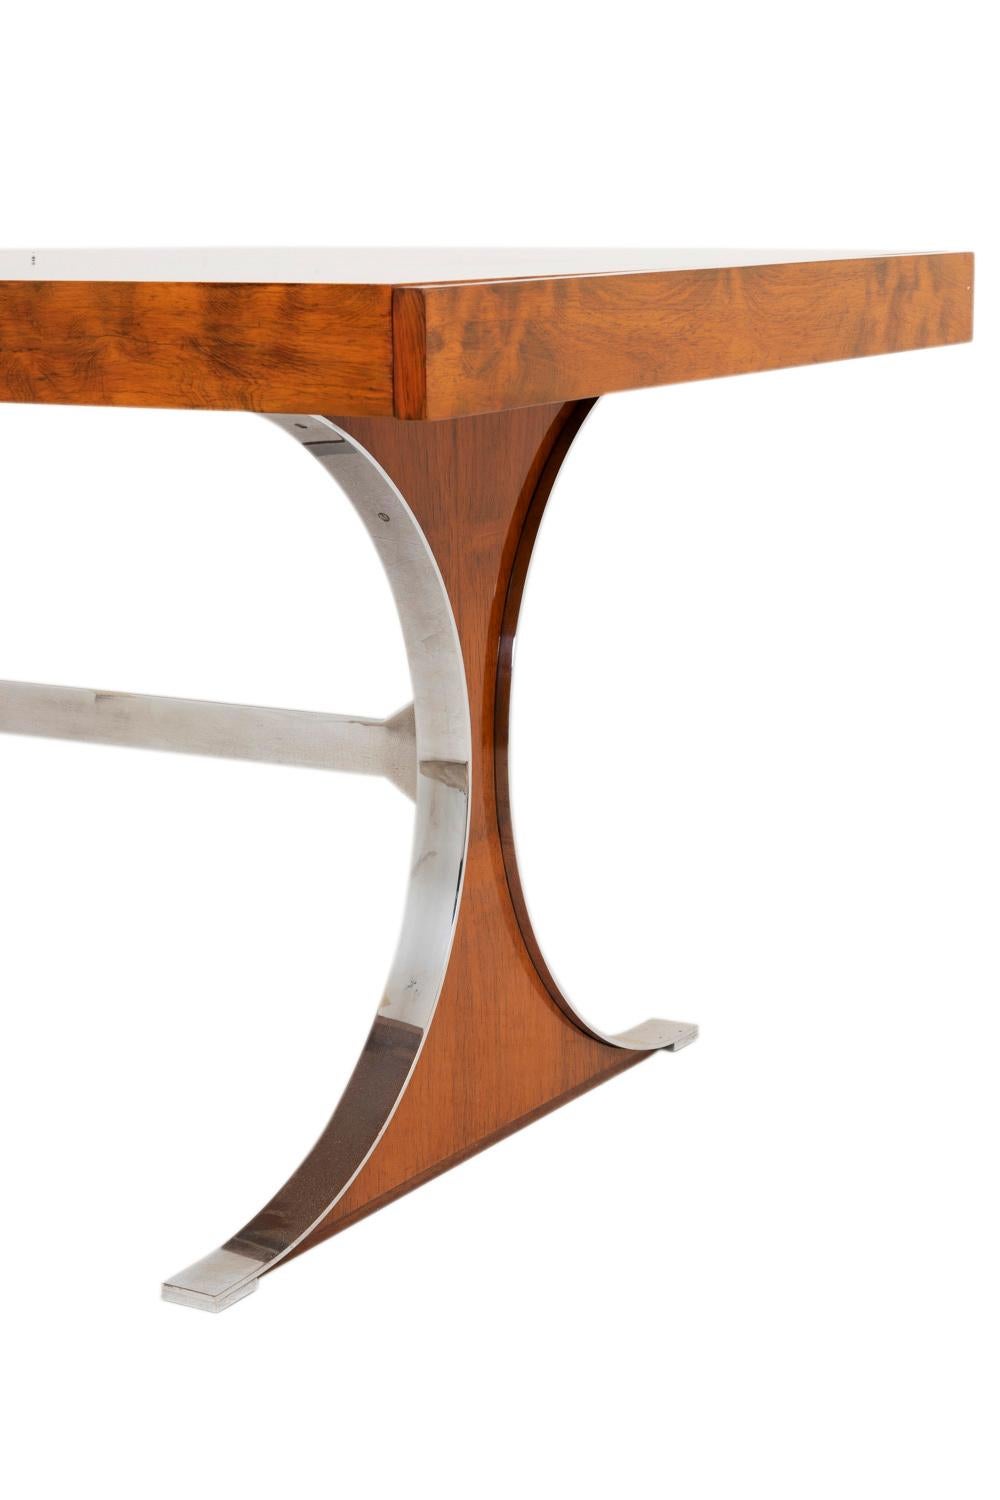 R.-J. Caillette, Sylvie Table, Rosewood and Stainless Steel, Charron Ed., 1961 7